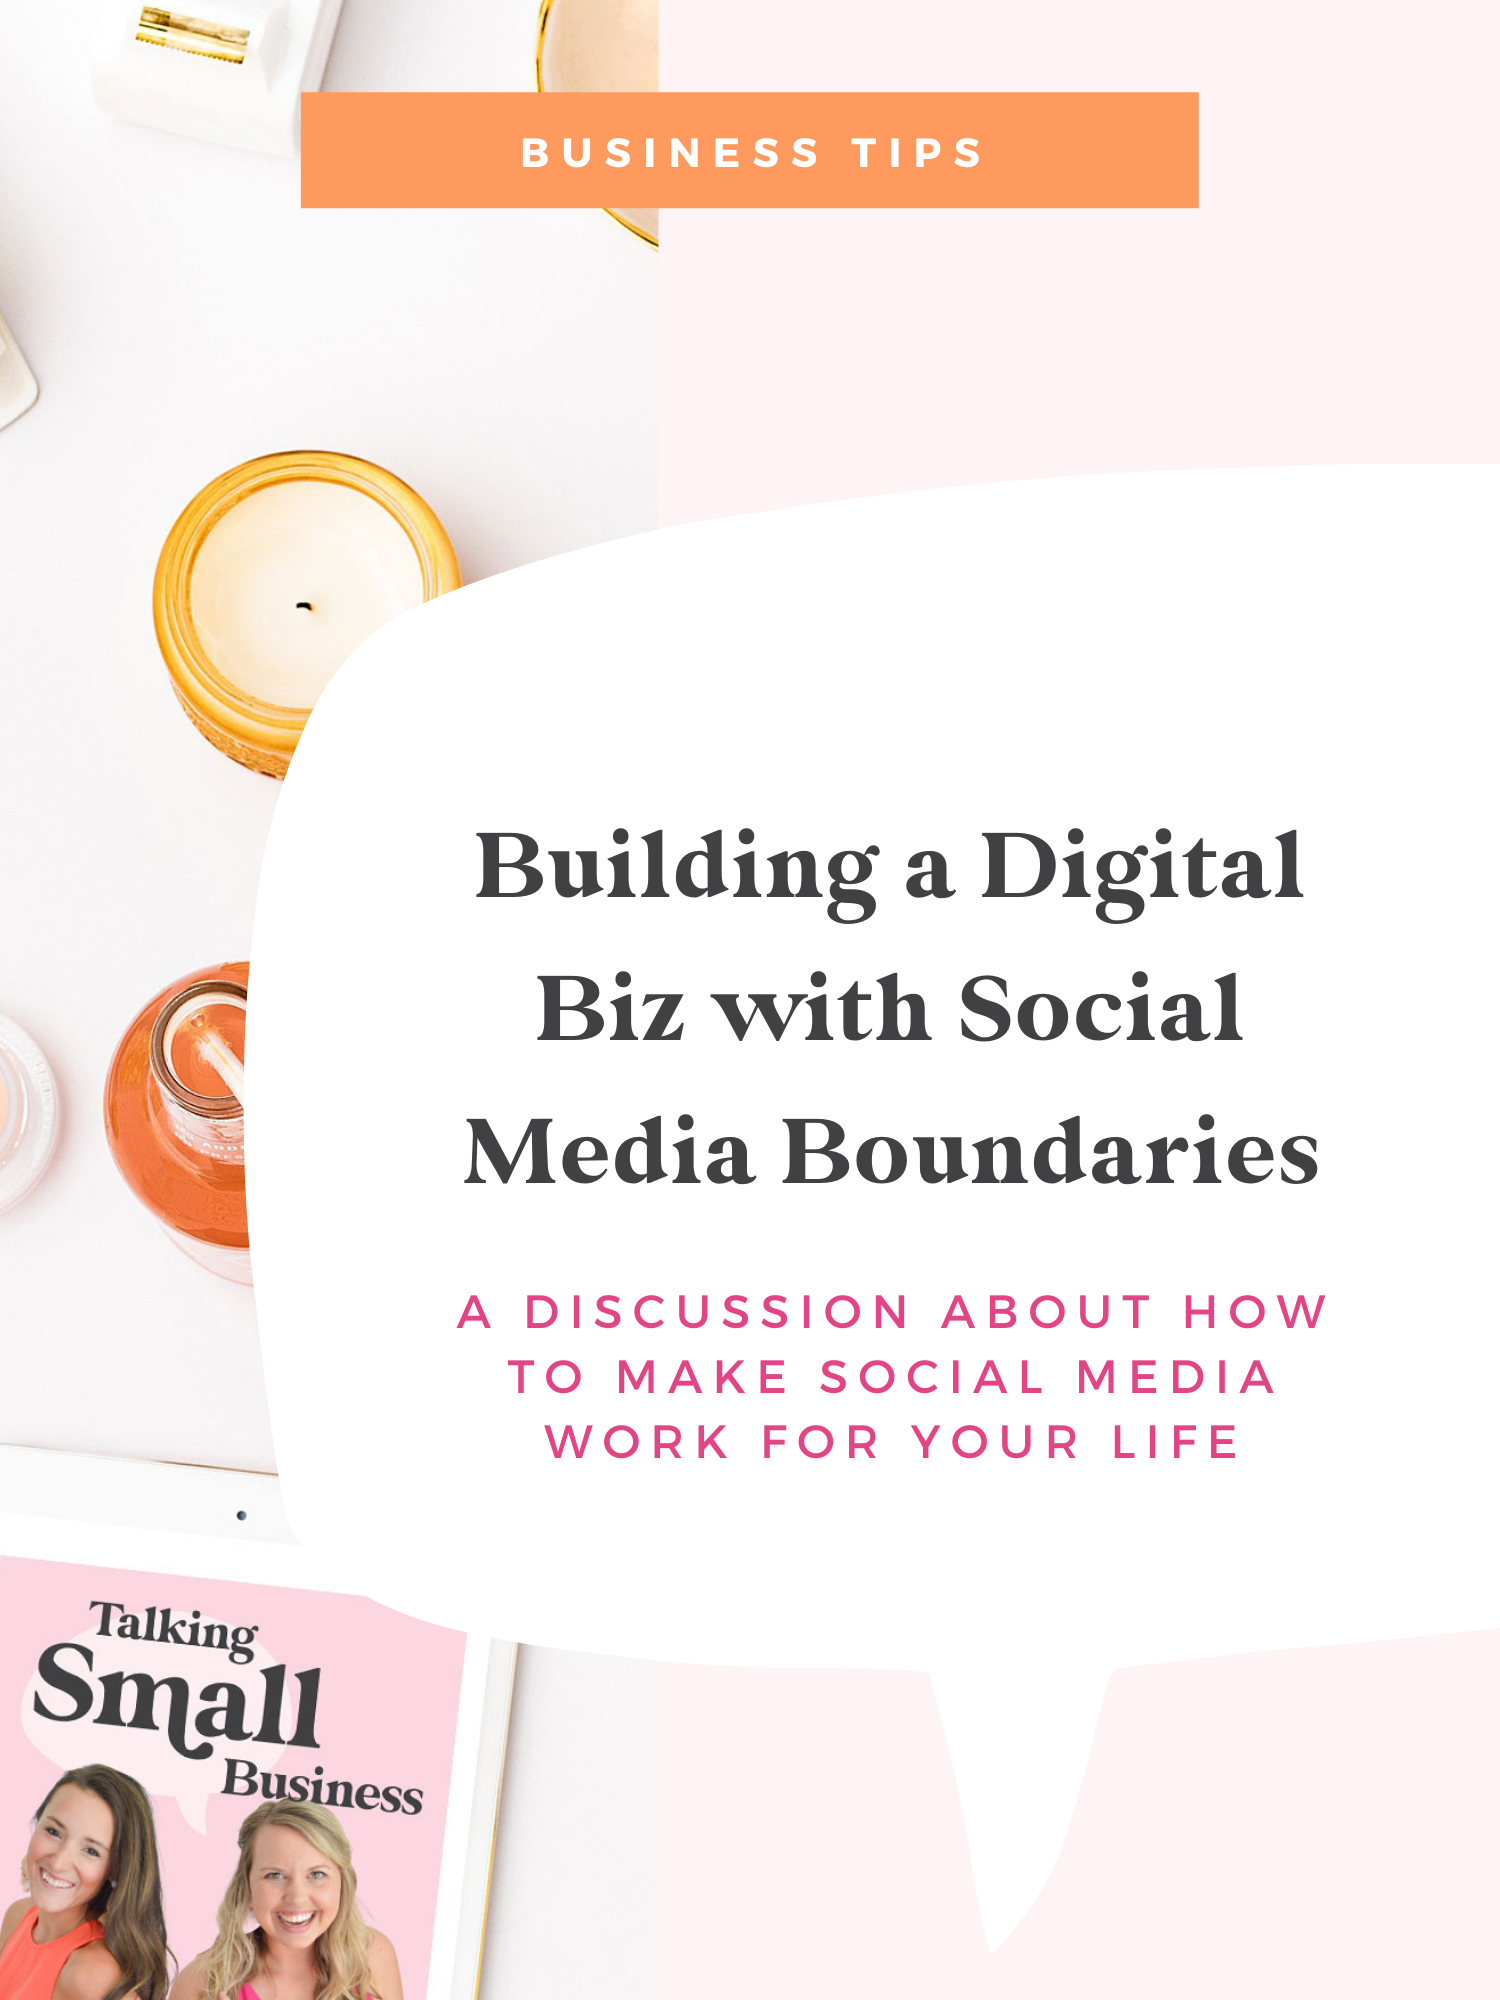 Building a Digital Biz with Social Media Boundaries: tips and stories shared by Kat Schmoyer and Megan Martin